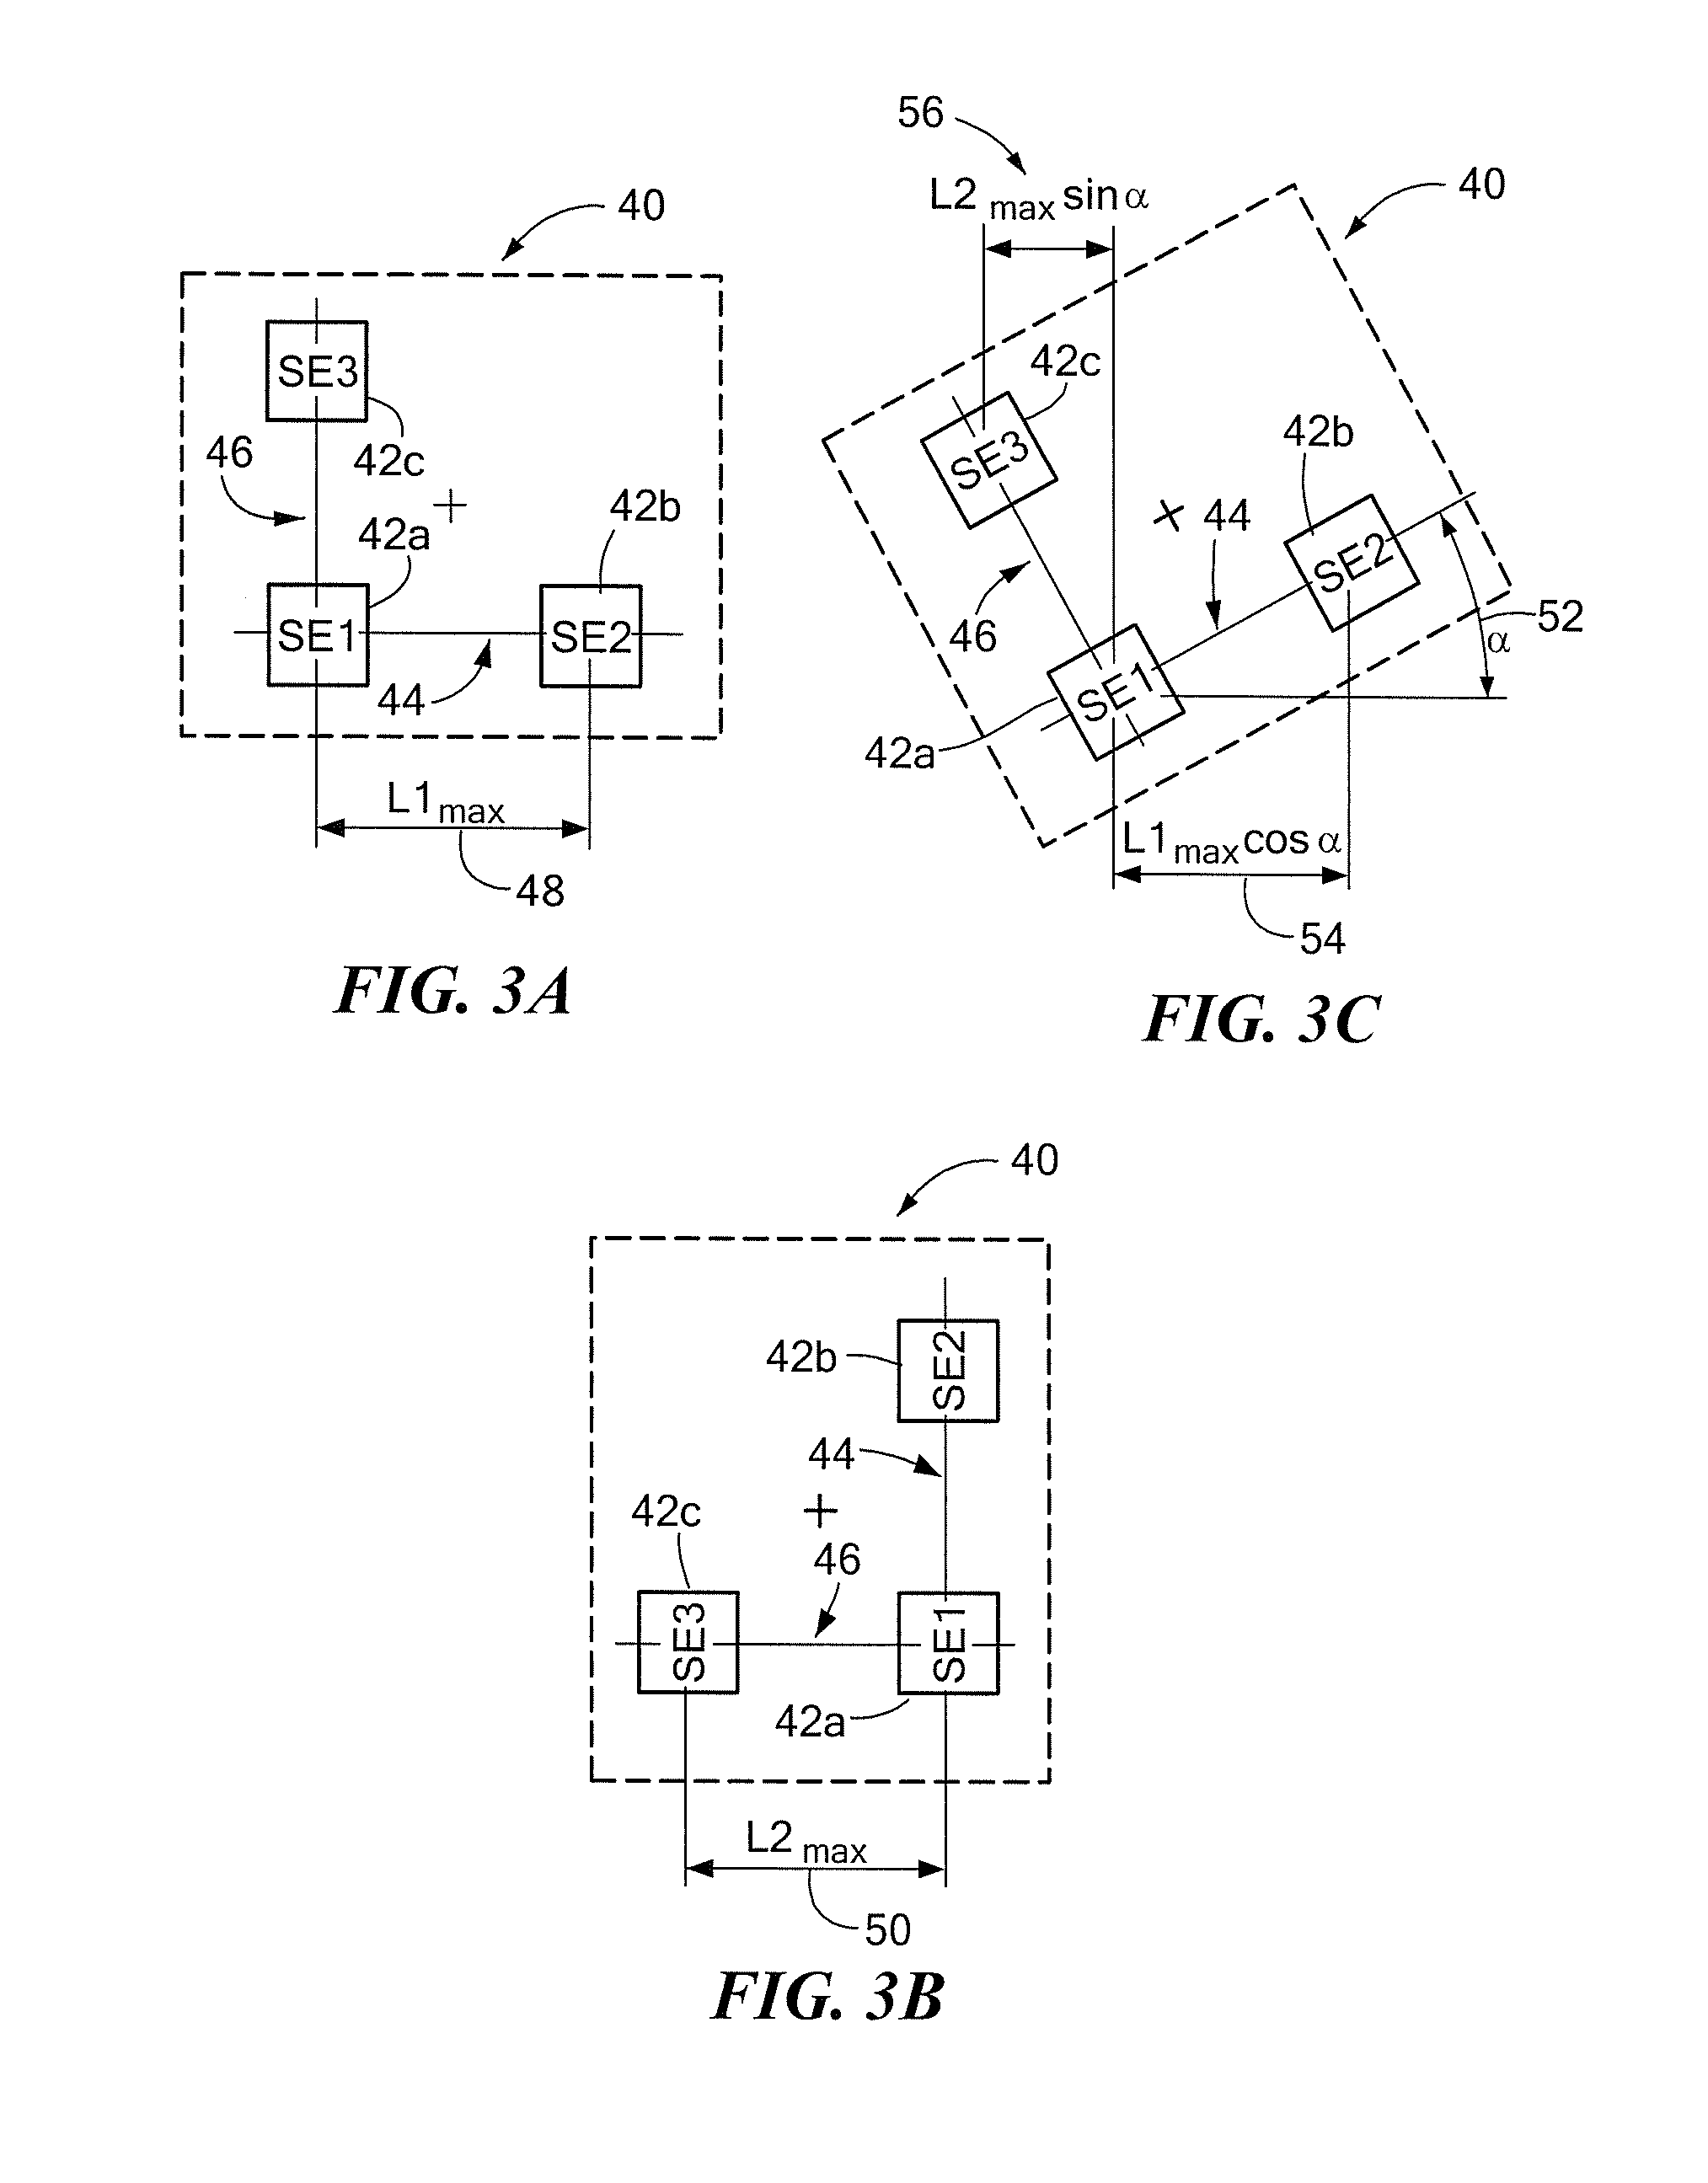 Differential magnetic field sensor structure for orientation independent measurement